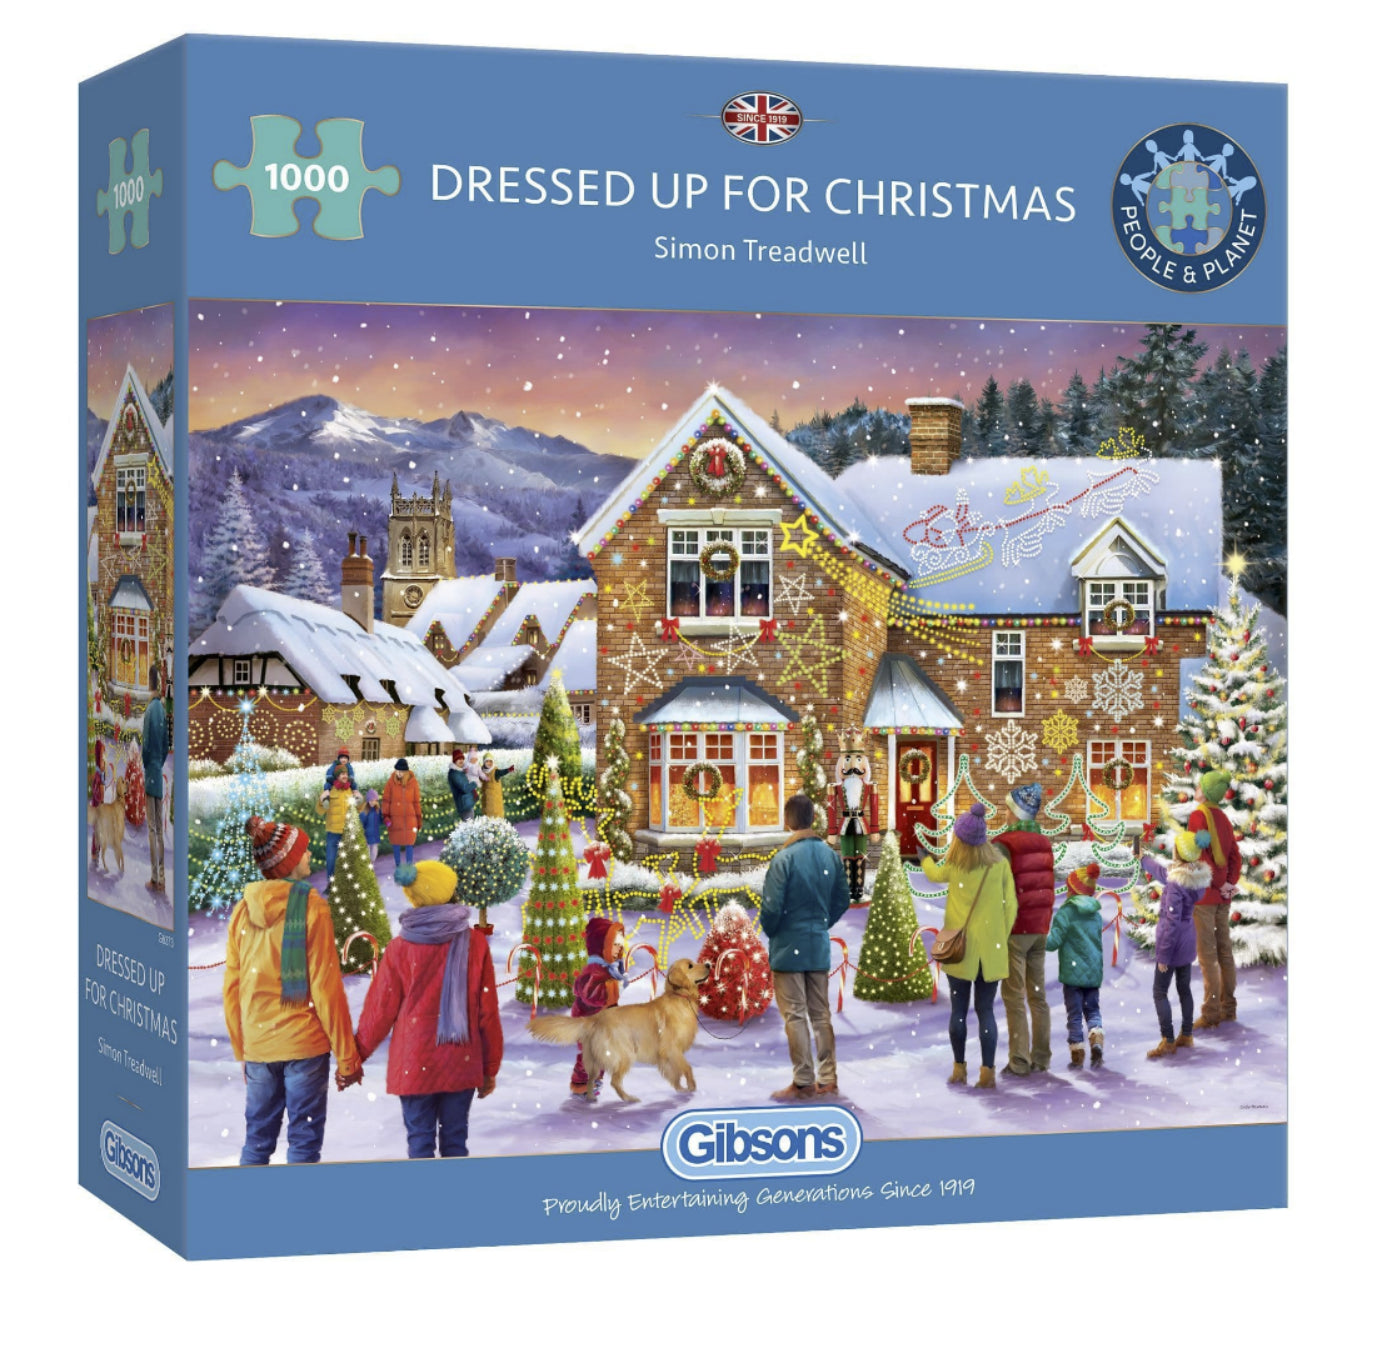 Dressed Up for Christmas 1000 Piece Jigsaw Puzzle